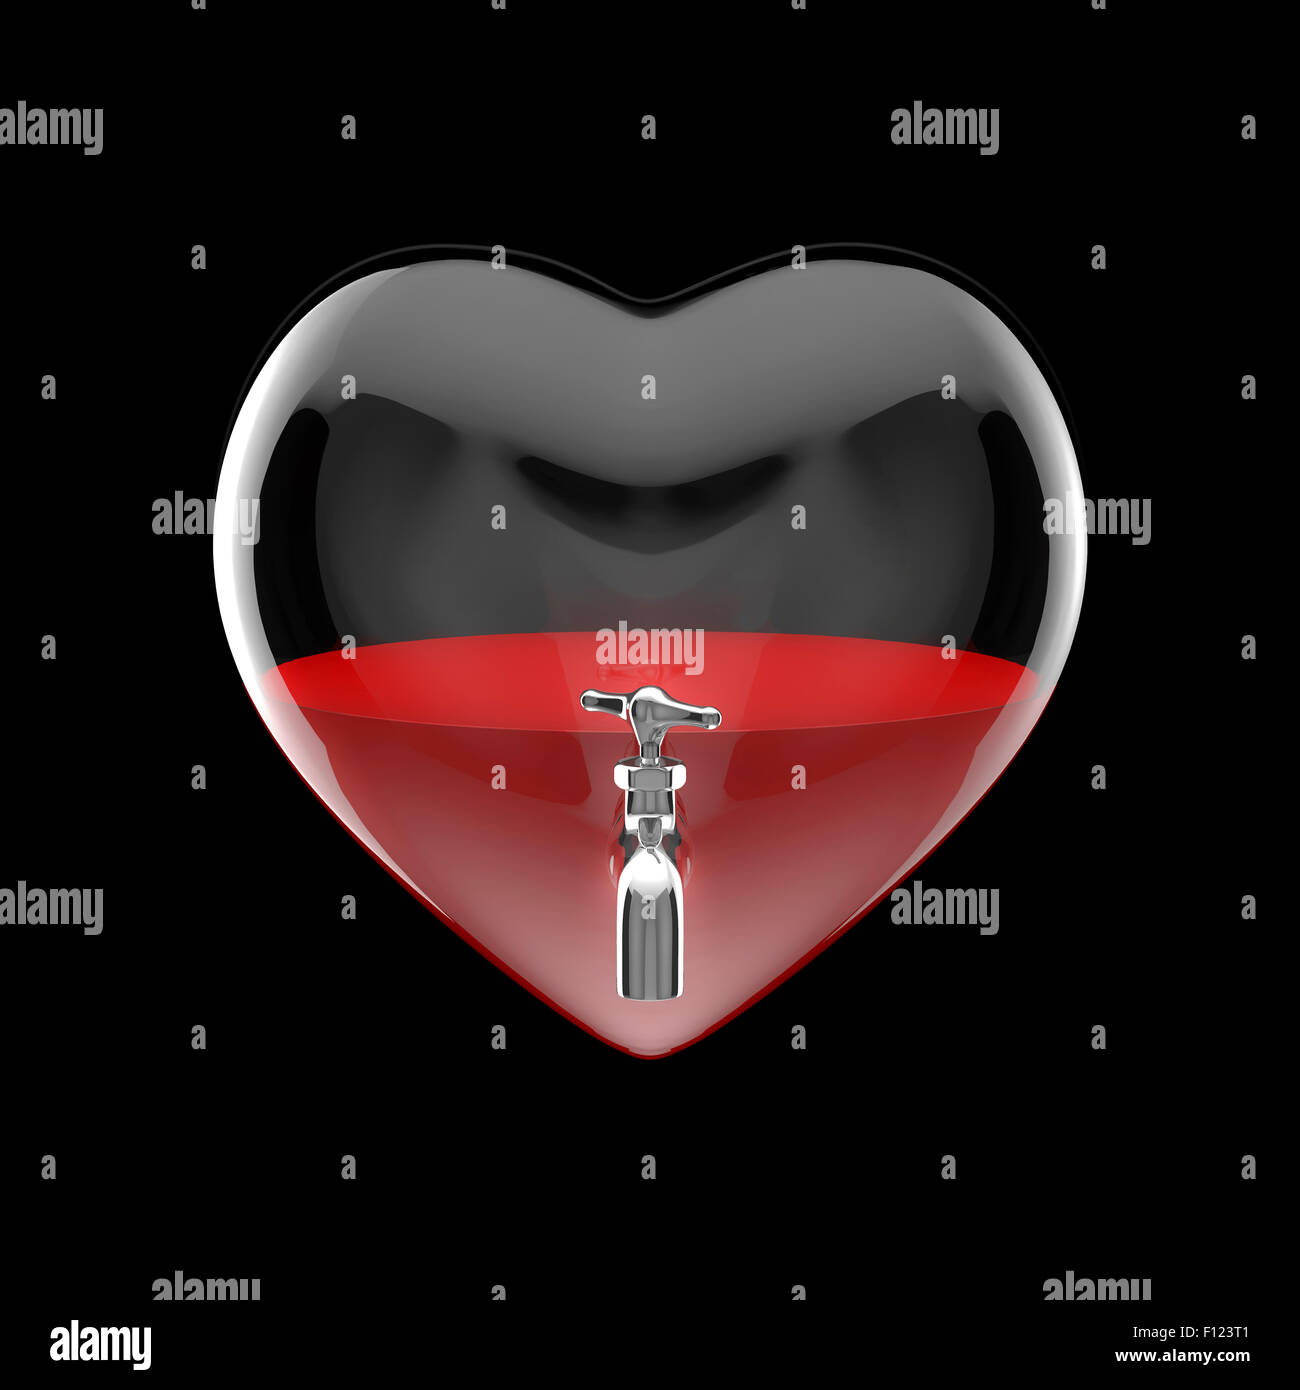 Filled heart / 3D render of heart with tap half filled with red liquid Stock Photo